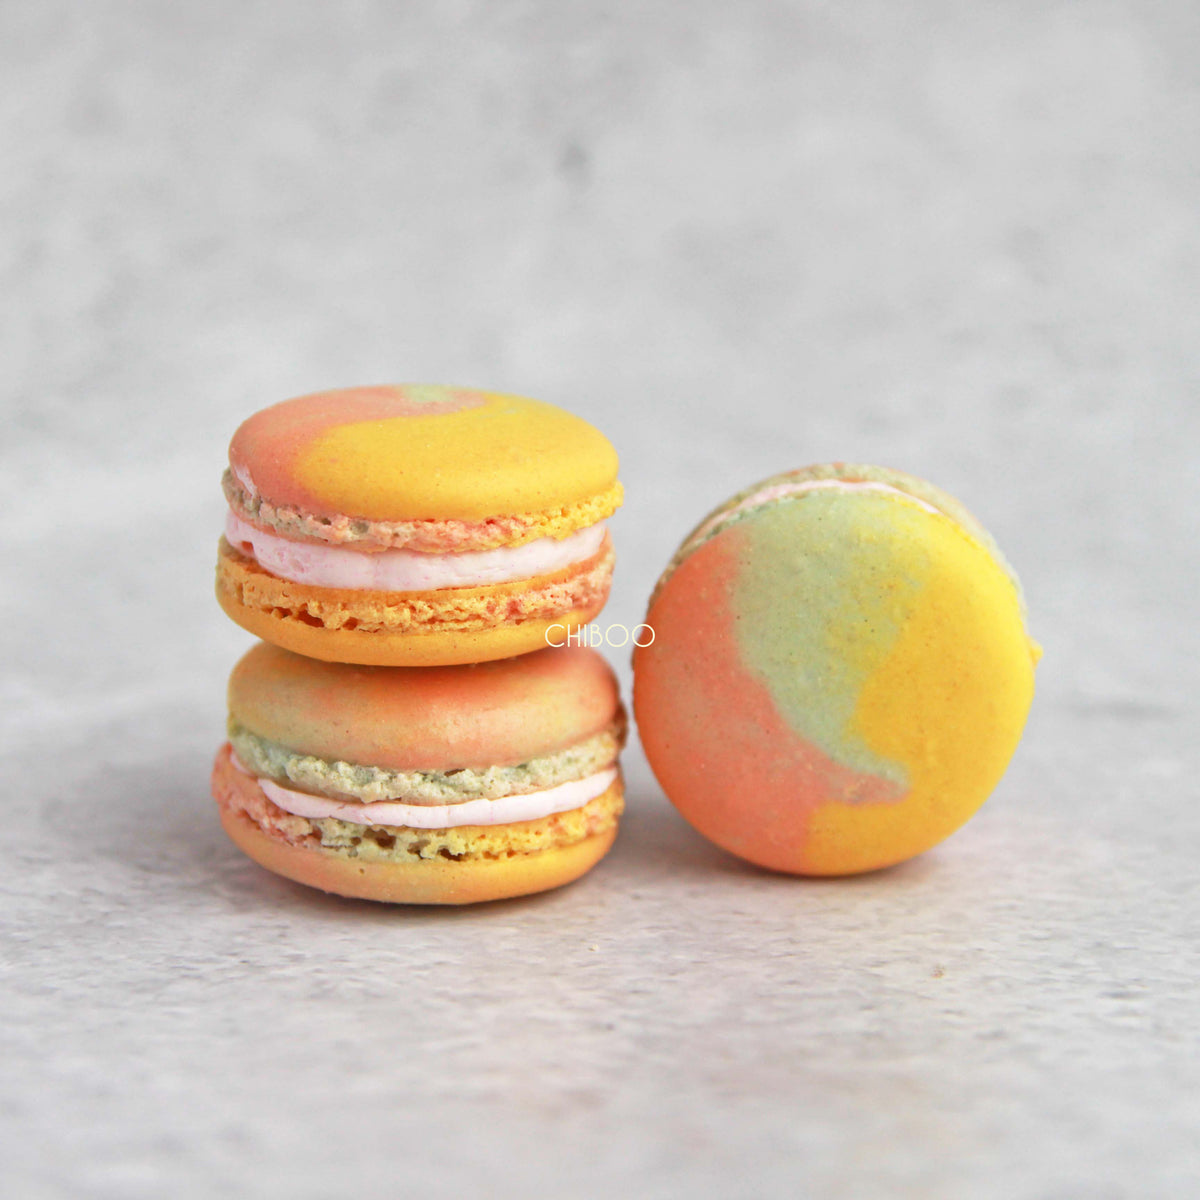 Custom Event French Macarons for Weddings, Parties, Colorful Northern Virginia Washington DC Area Commercial Event Macarons Desserts Catering